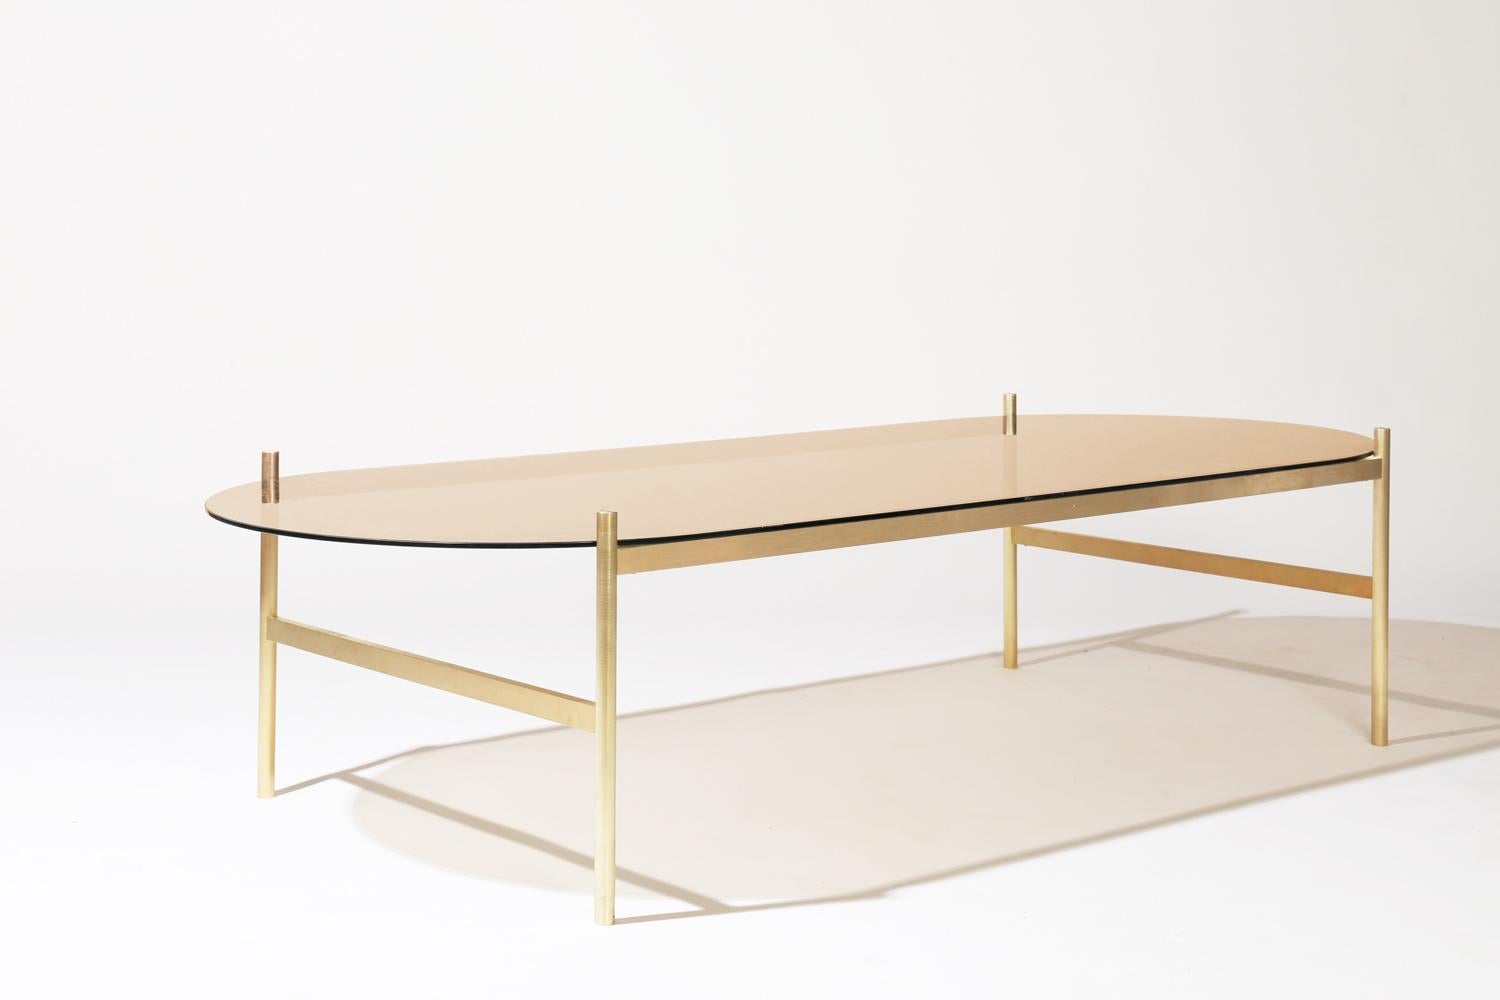 Made to order. Please allow 6 weeks for production.

Brass Frame / Rose Glass

The Duotone coffee table is a commercial grade table made from precision machined solid brass. Each table is made locally in St. Augustine, Florida with domestically